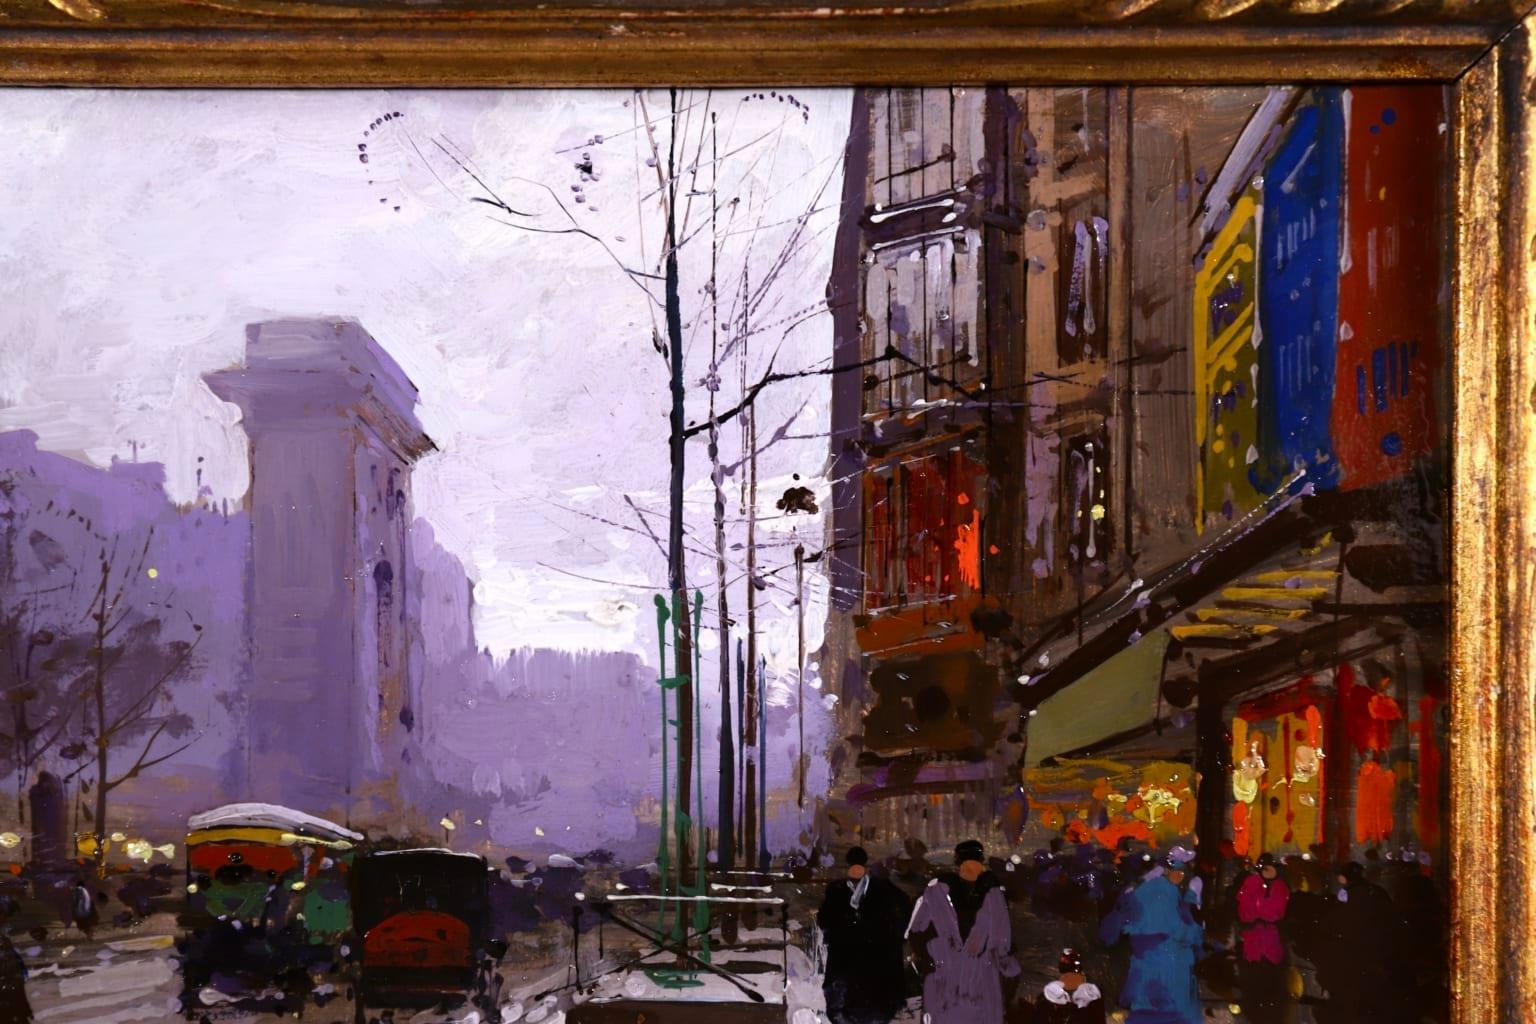 A wonderful oil on original canvas circa 1930 by sought after French impressionist painter Edouard Leon Cortes. The work depicts a bustling street scene in Paris, France on a rainy day. On the left is the Porte Saint-Denis. The reflections of the